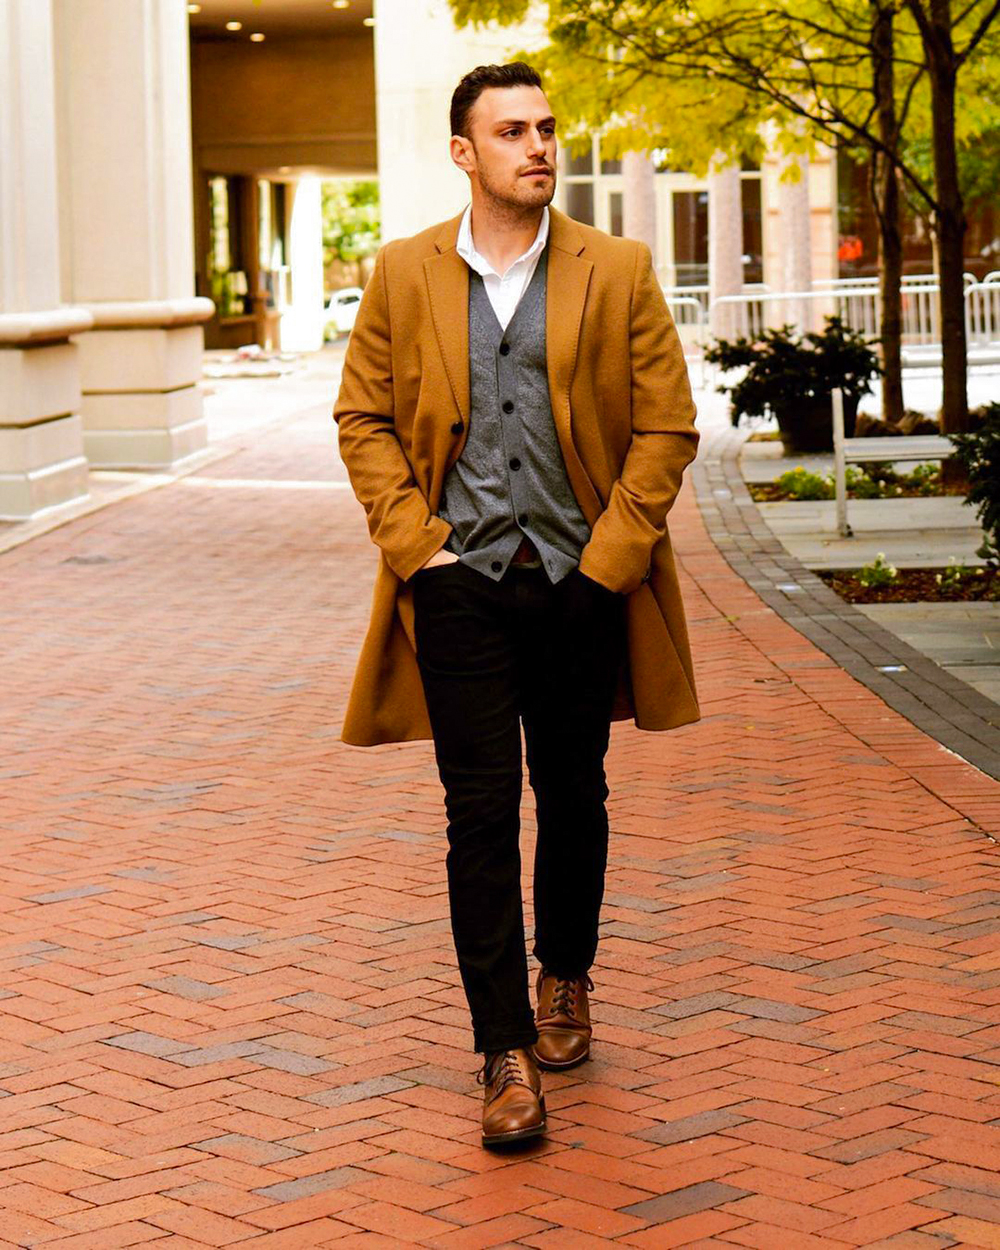 Wear brown overcoat, gray cardigan, white long sleeve shirt, and brown derby shoes